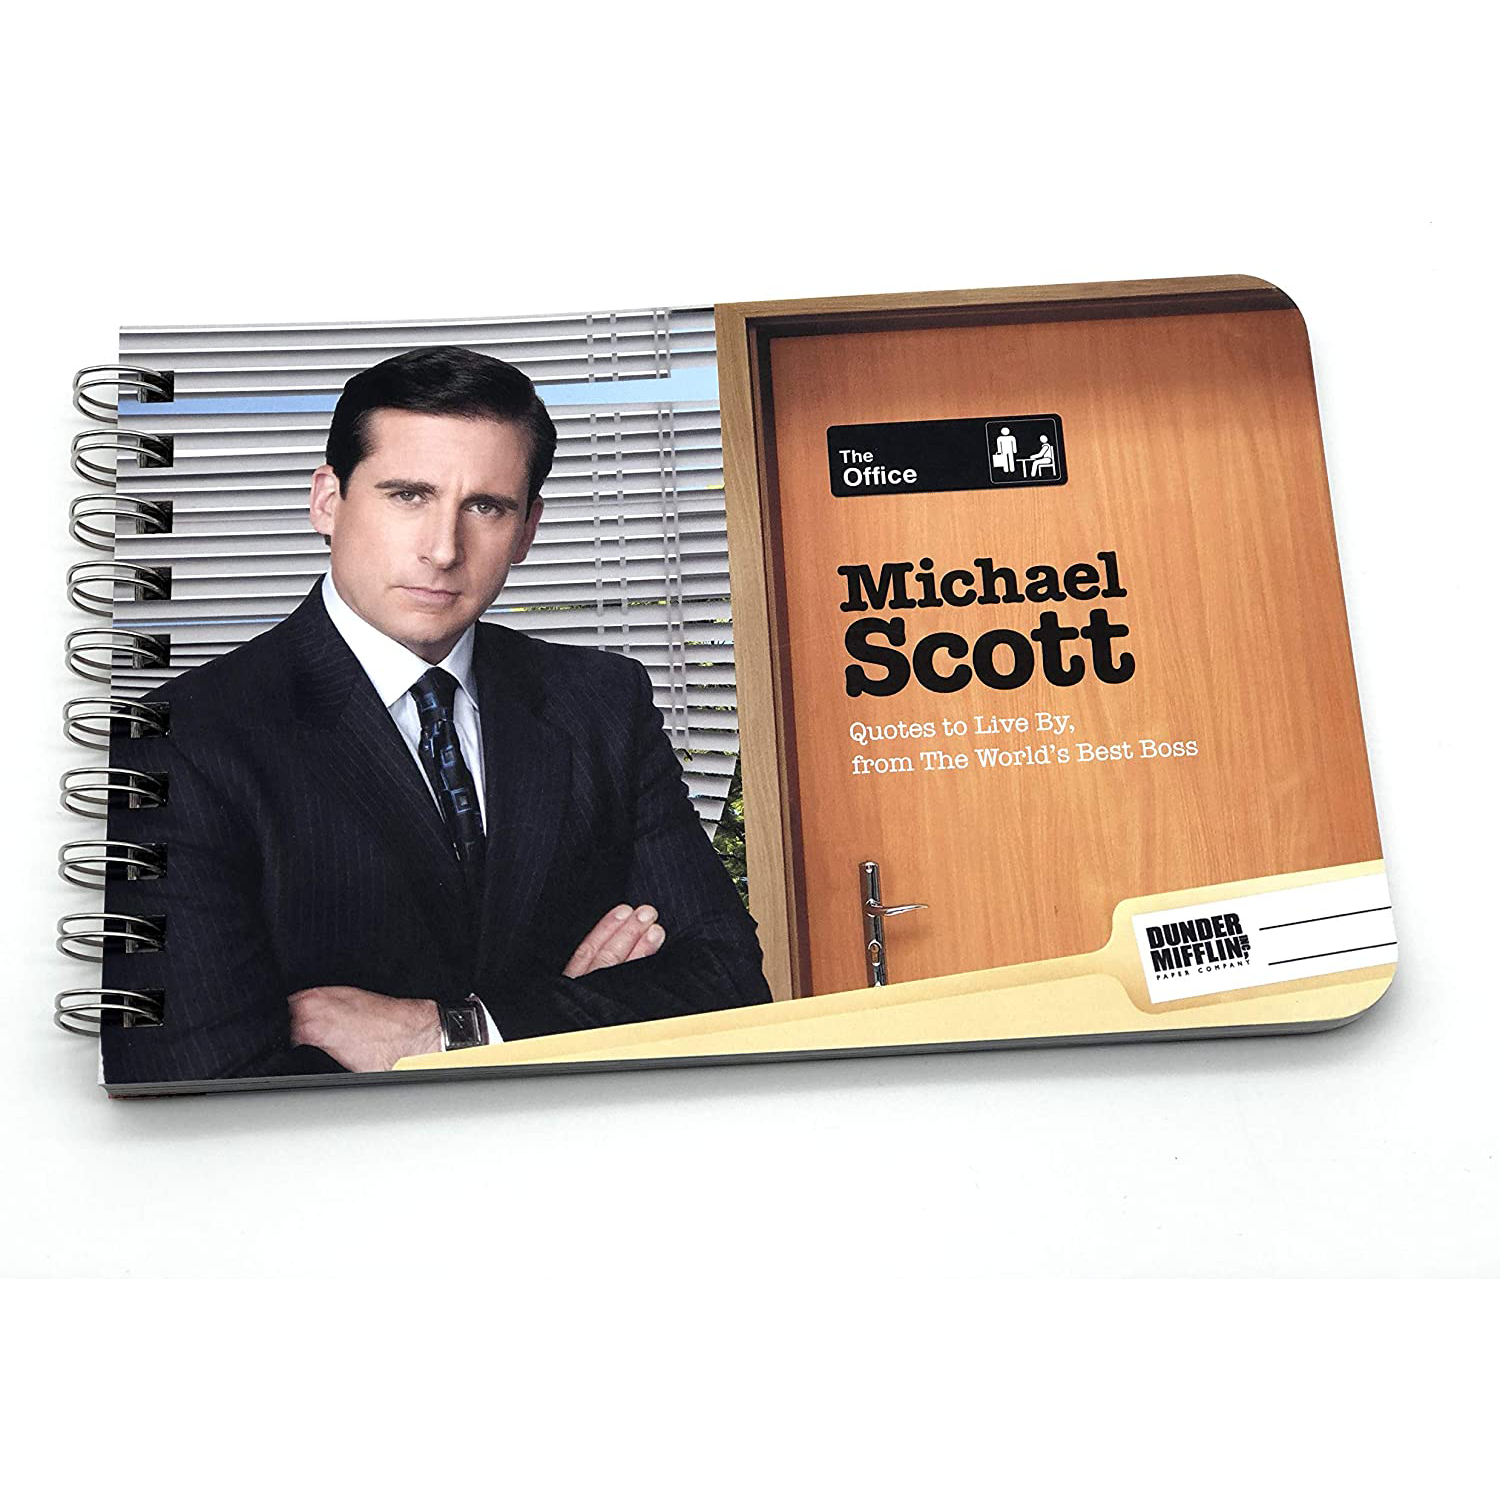 The Office Michael Scott Quotes to Live By Book | NBC Store